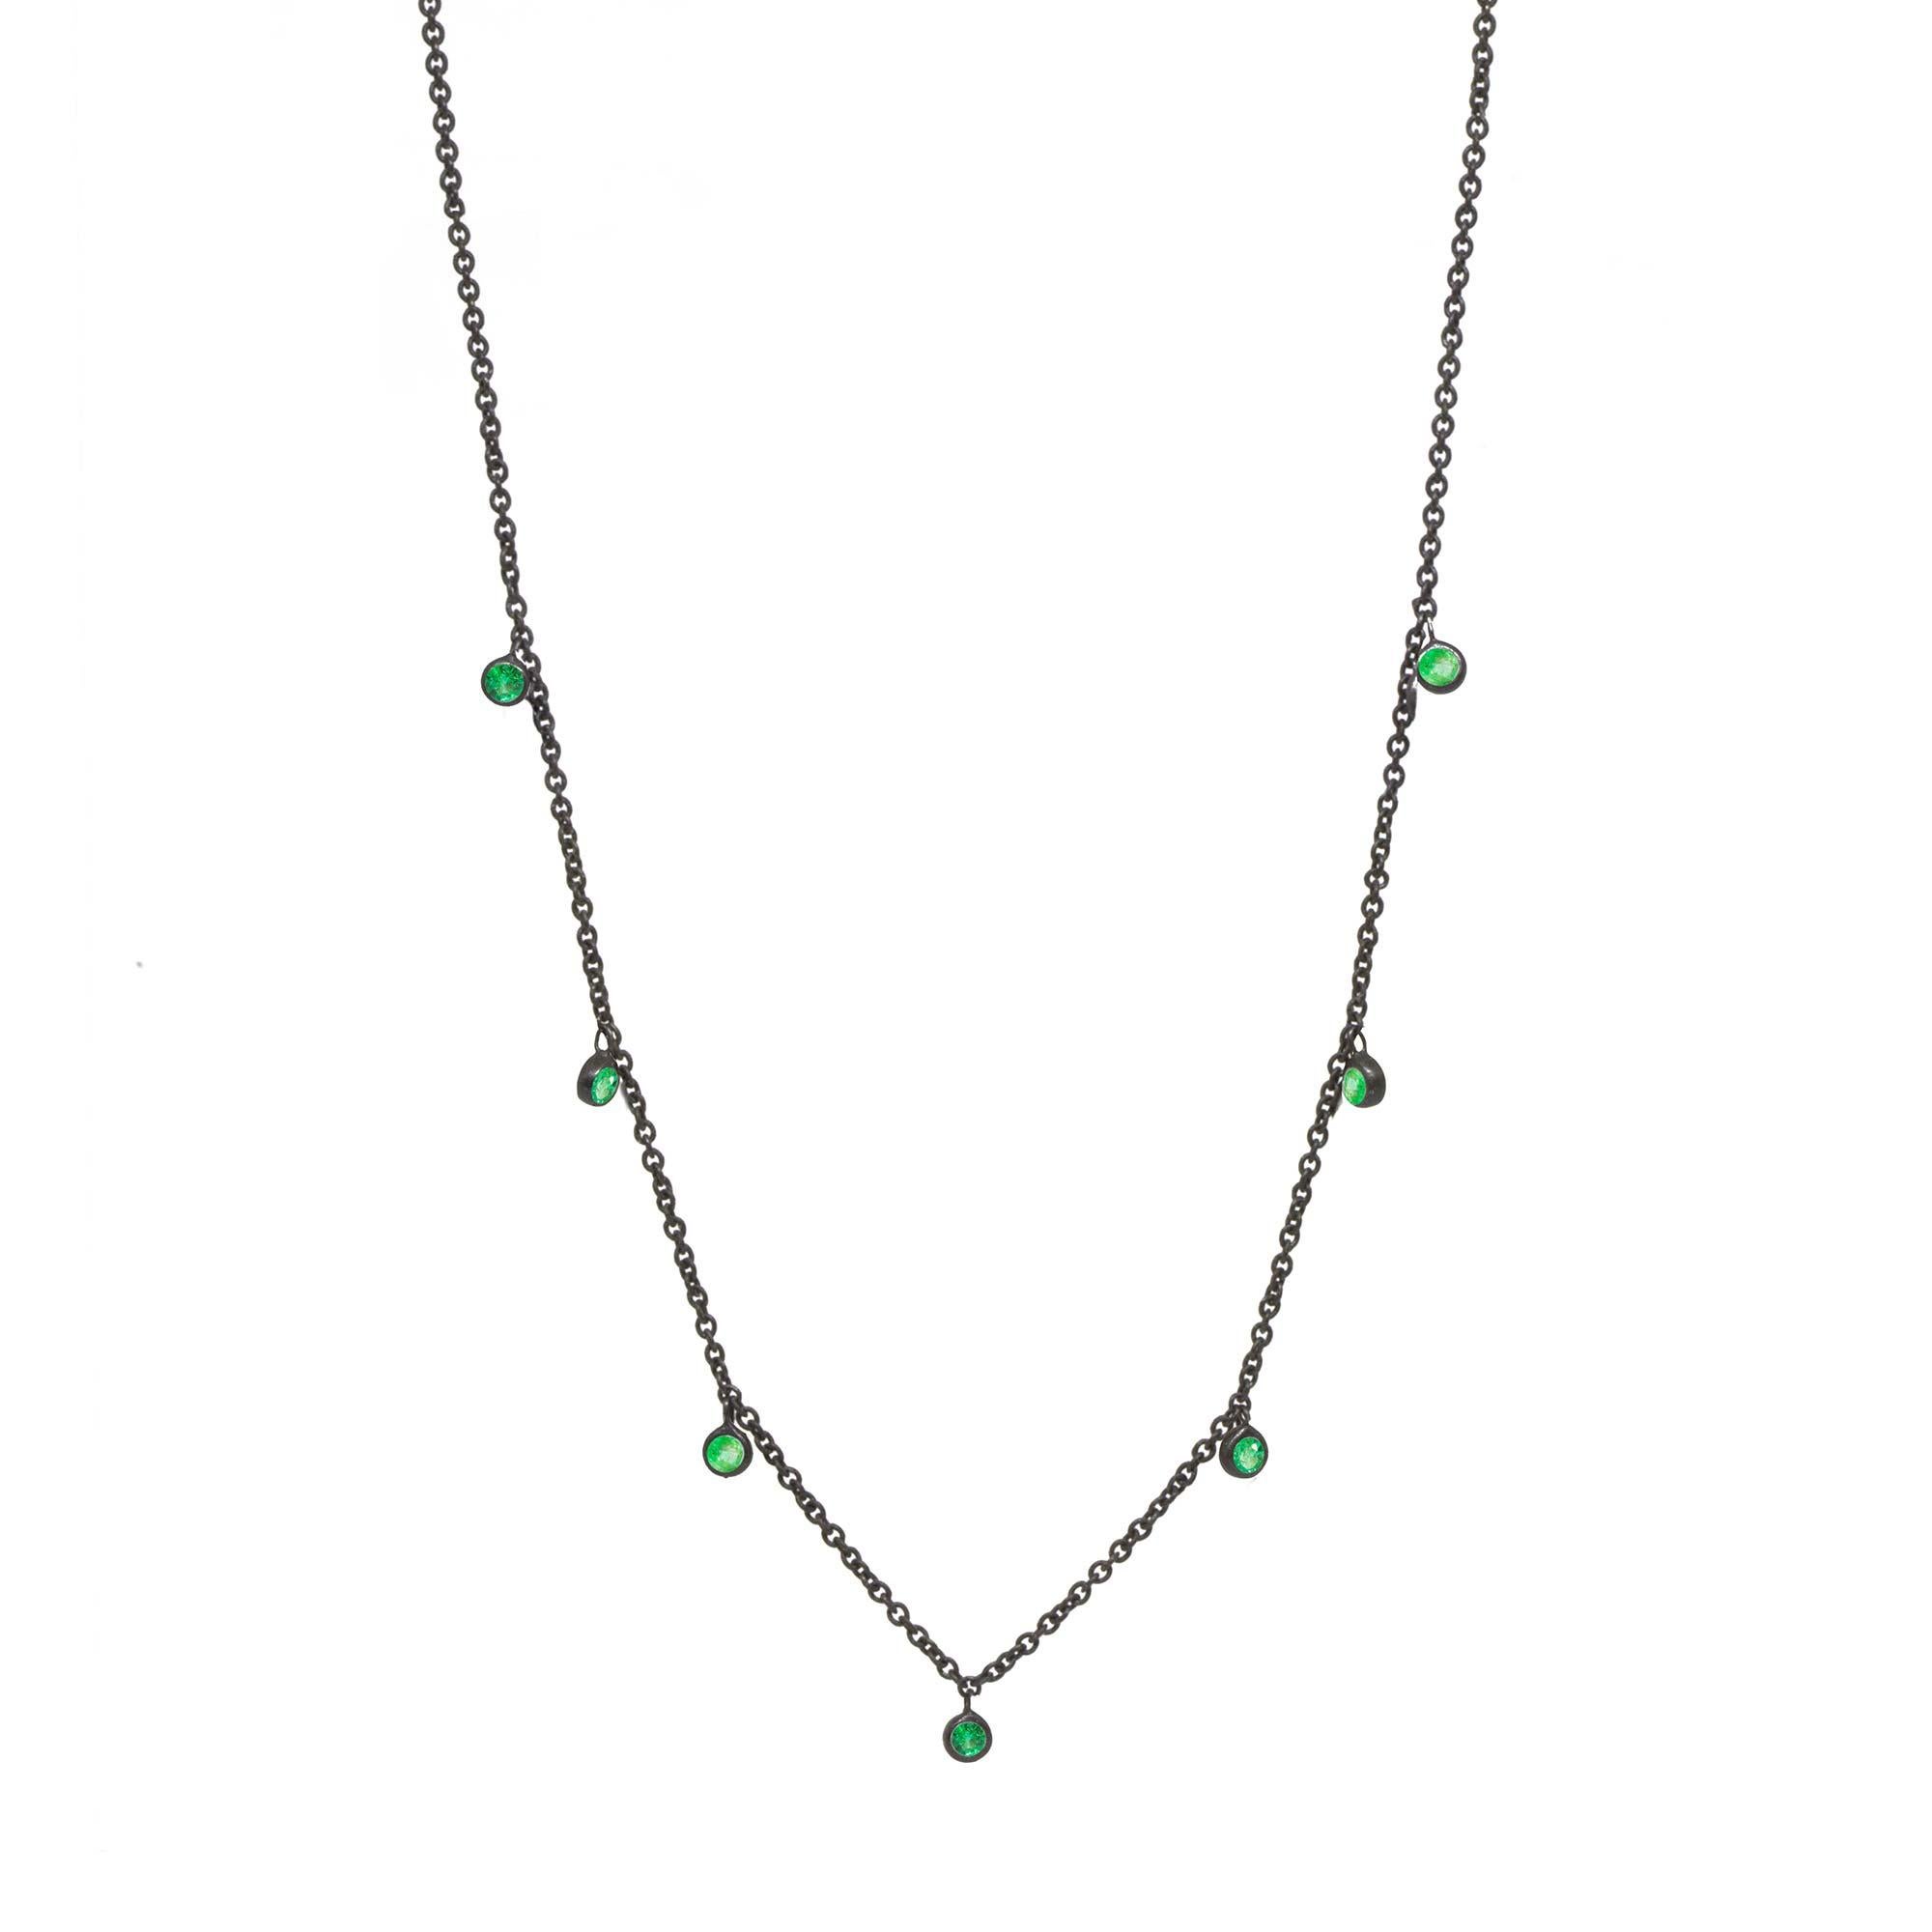 Made with emerald gemstone rimmed in black oxidized silver, our Forged Silver Necklace provides an effortless, yet fashionable style. 

Metal: Black Oxidized Silver
Stone carat: 0.75
Length: 15-17''
Stone size: 2.5mm

About the stones:
Genuine